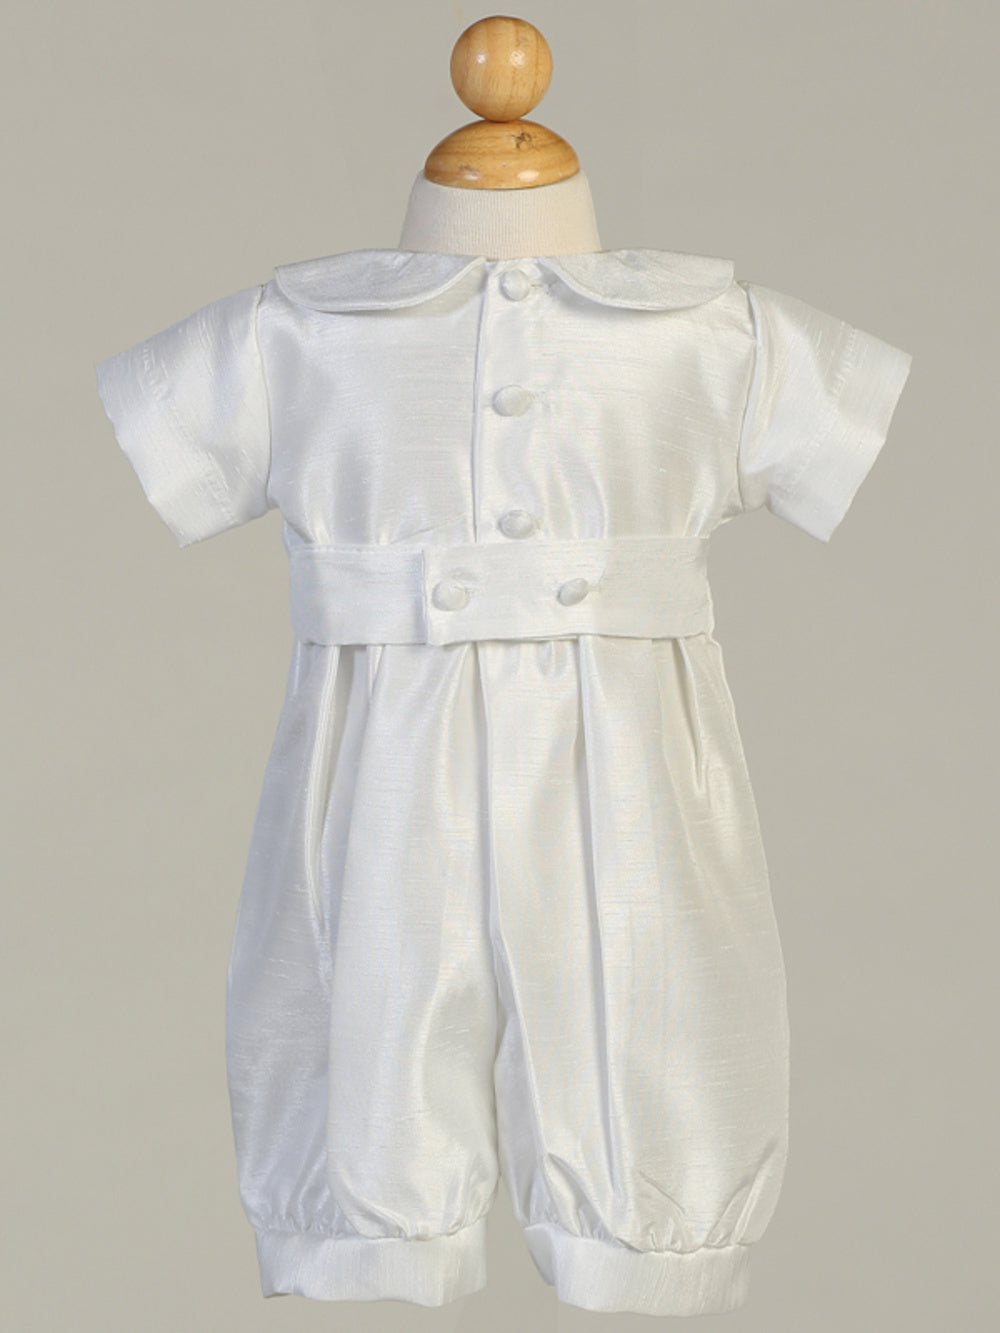 Shantung romper with matching hat